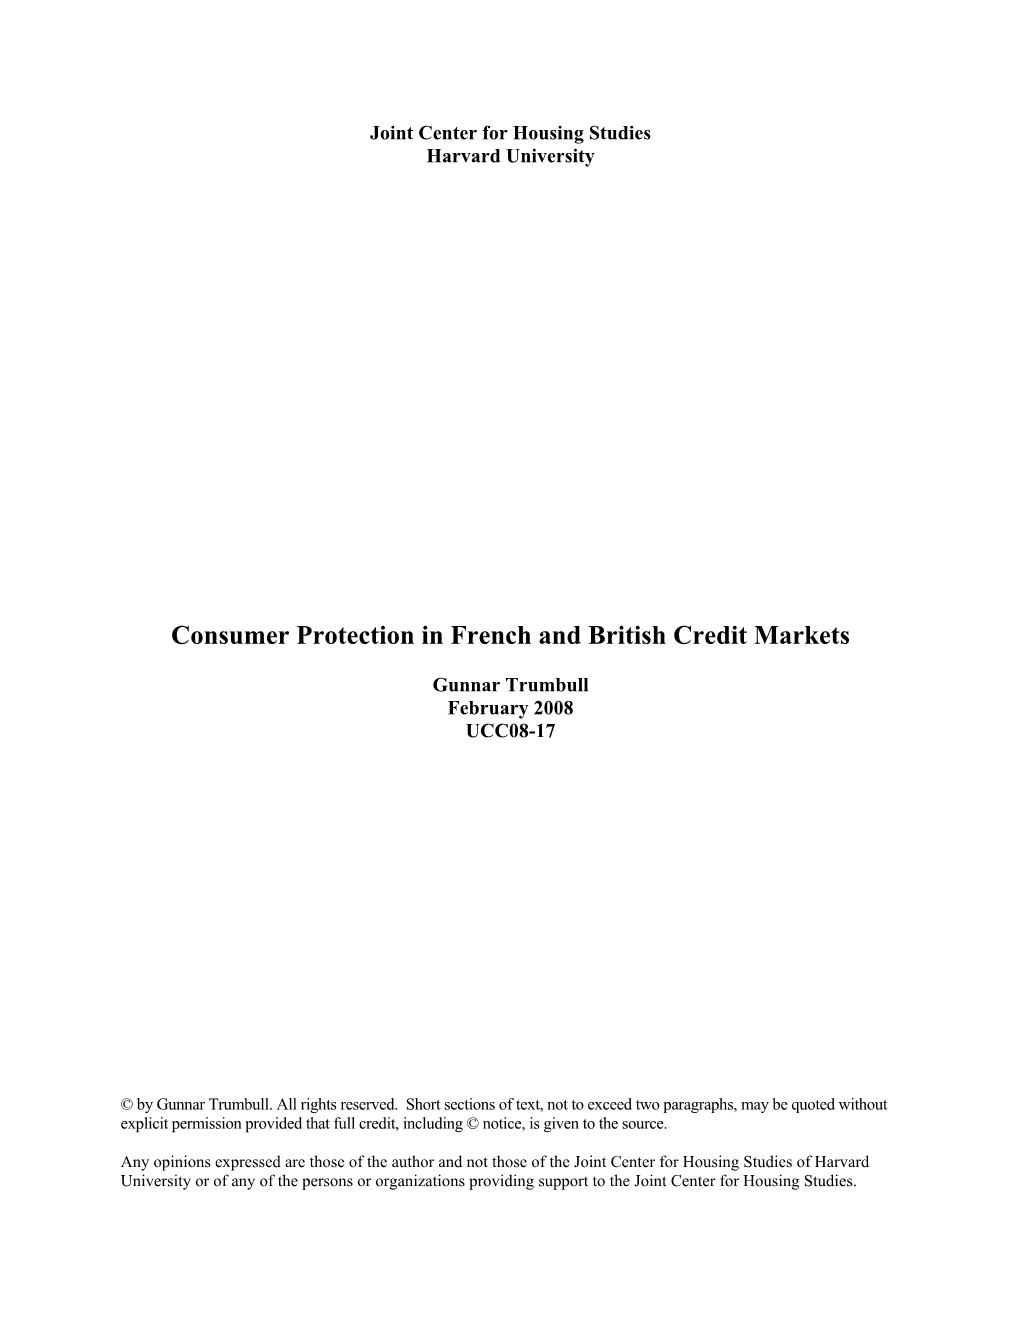 Consumer Protection in French and British Credit Markets